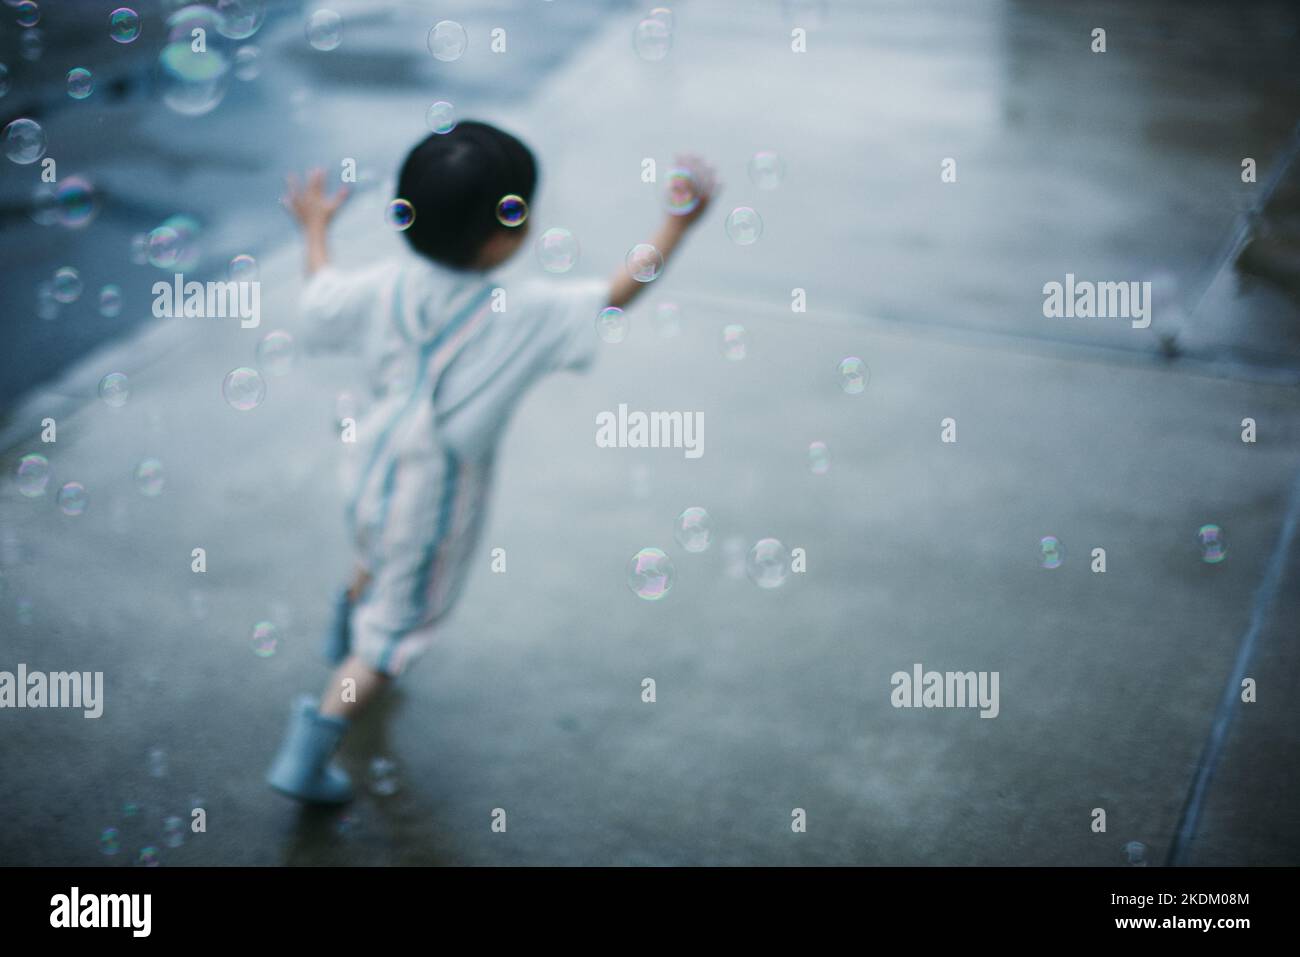 Japanese kid playing outside on a rainy day Stock Photo